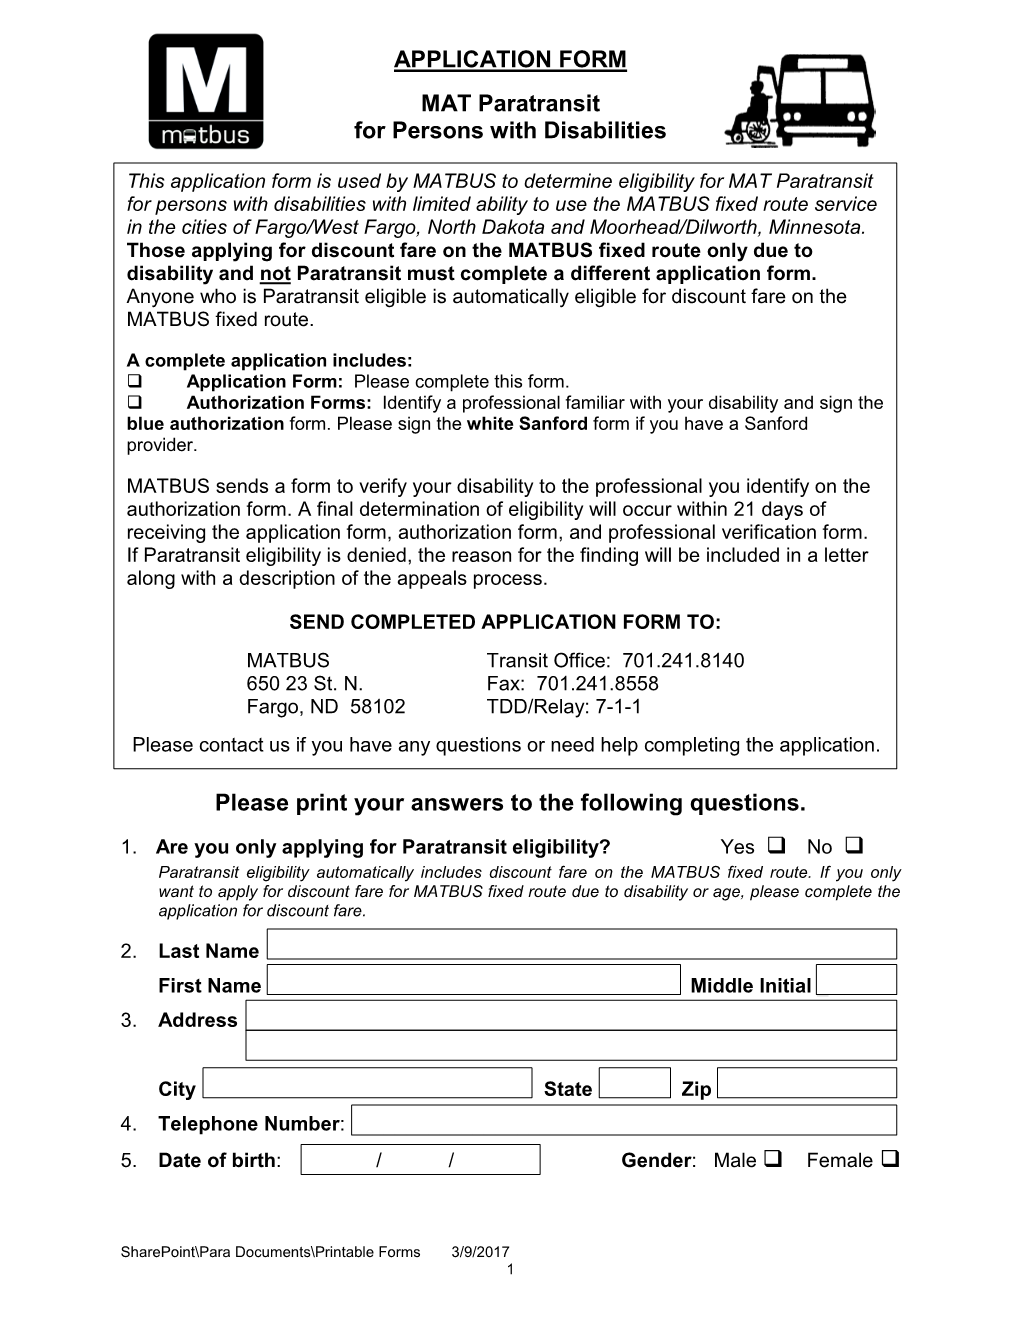 APPLICATION FORM MAT Paratransit for Persons With